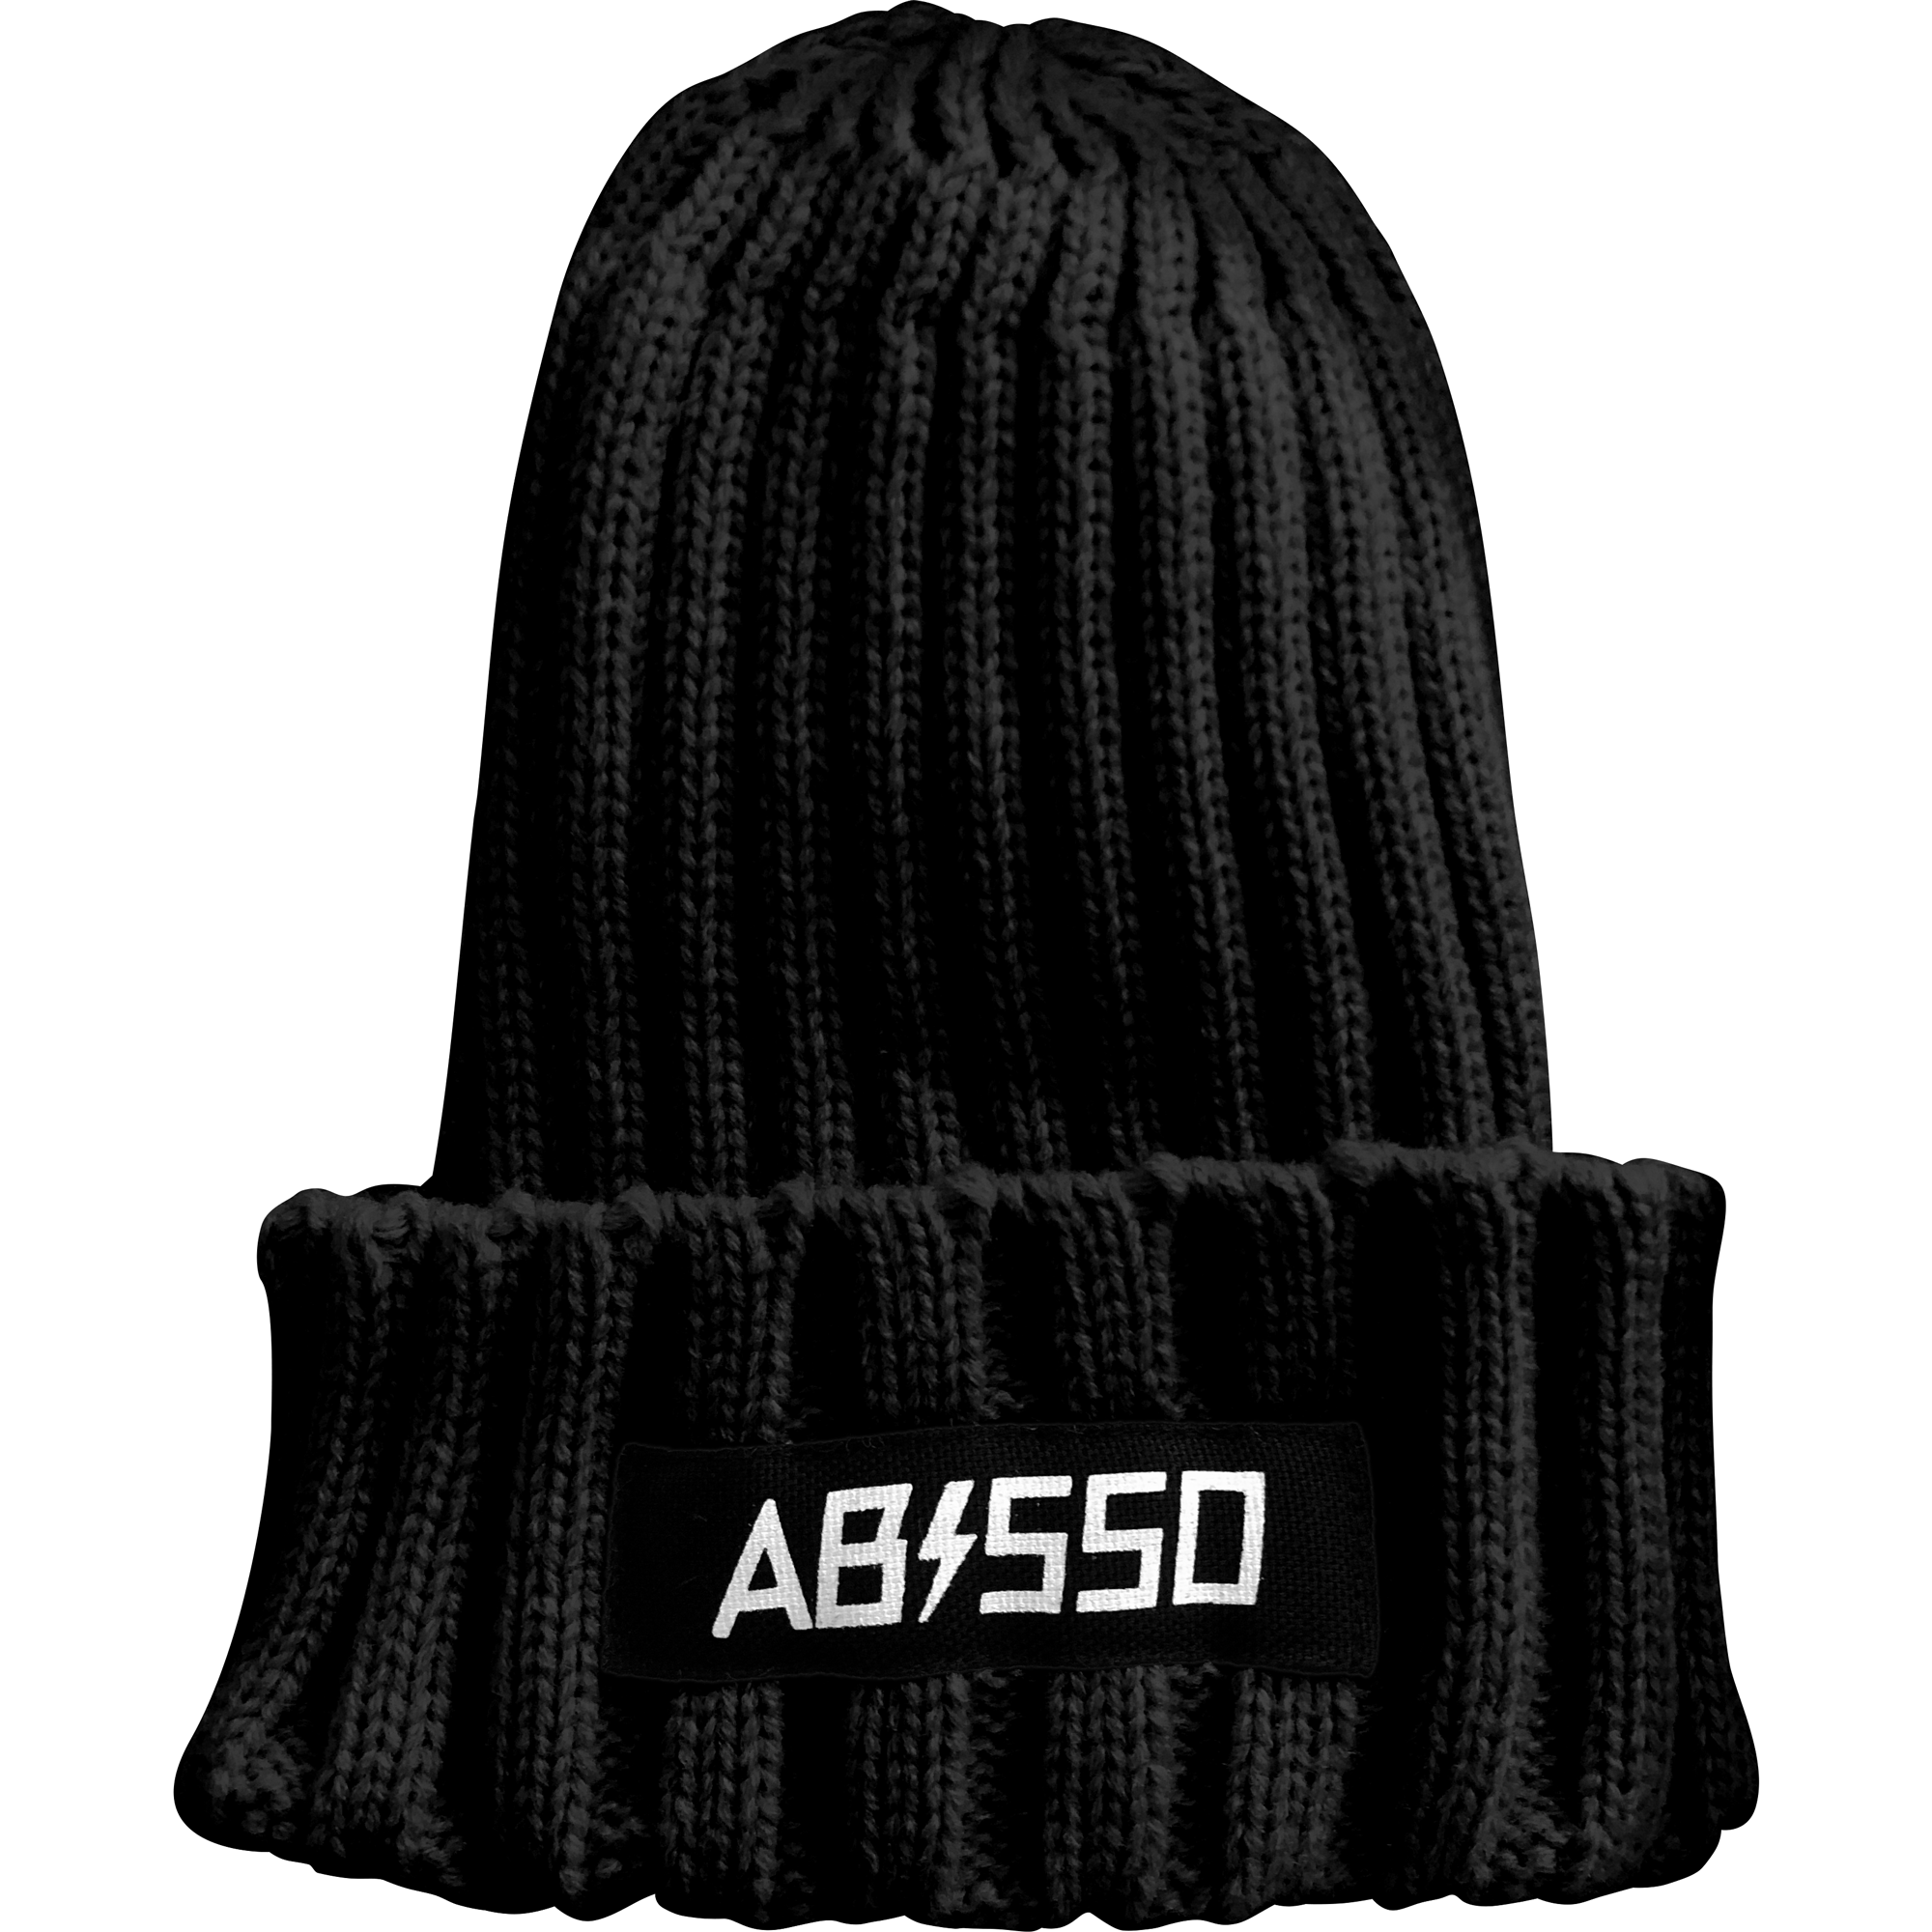 Abisso Winter Beanies